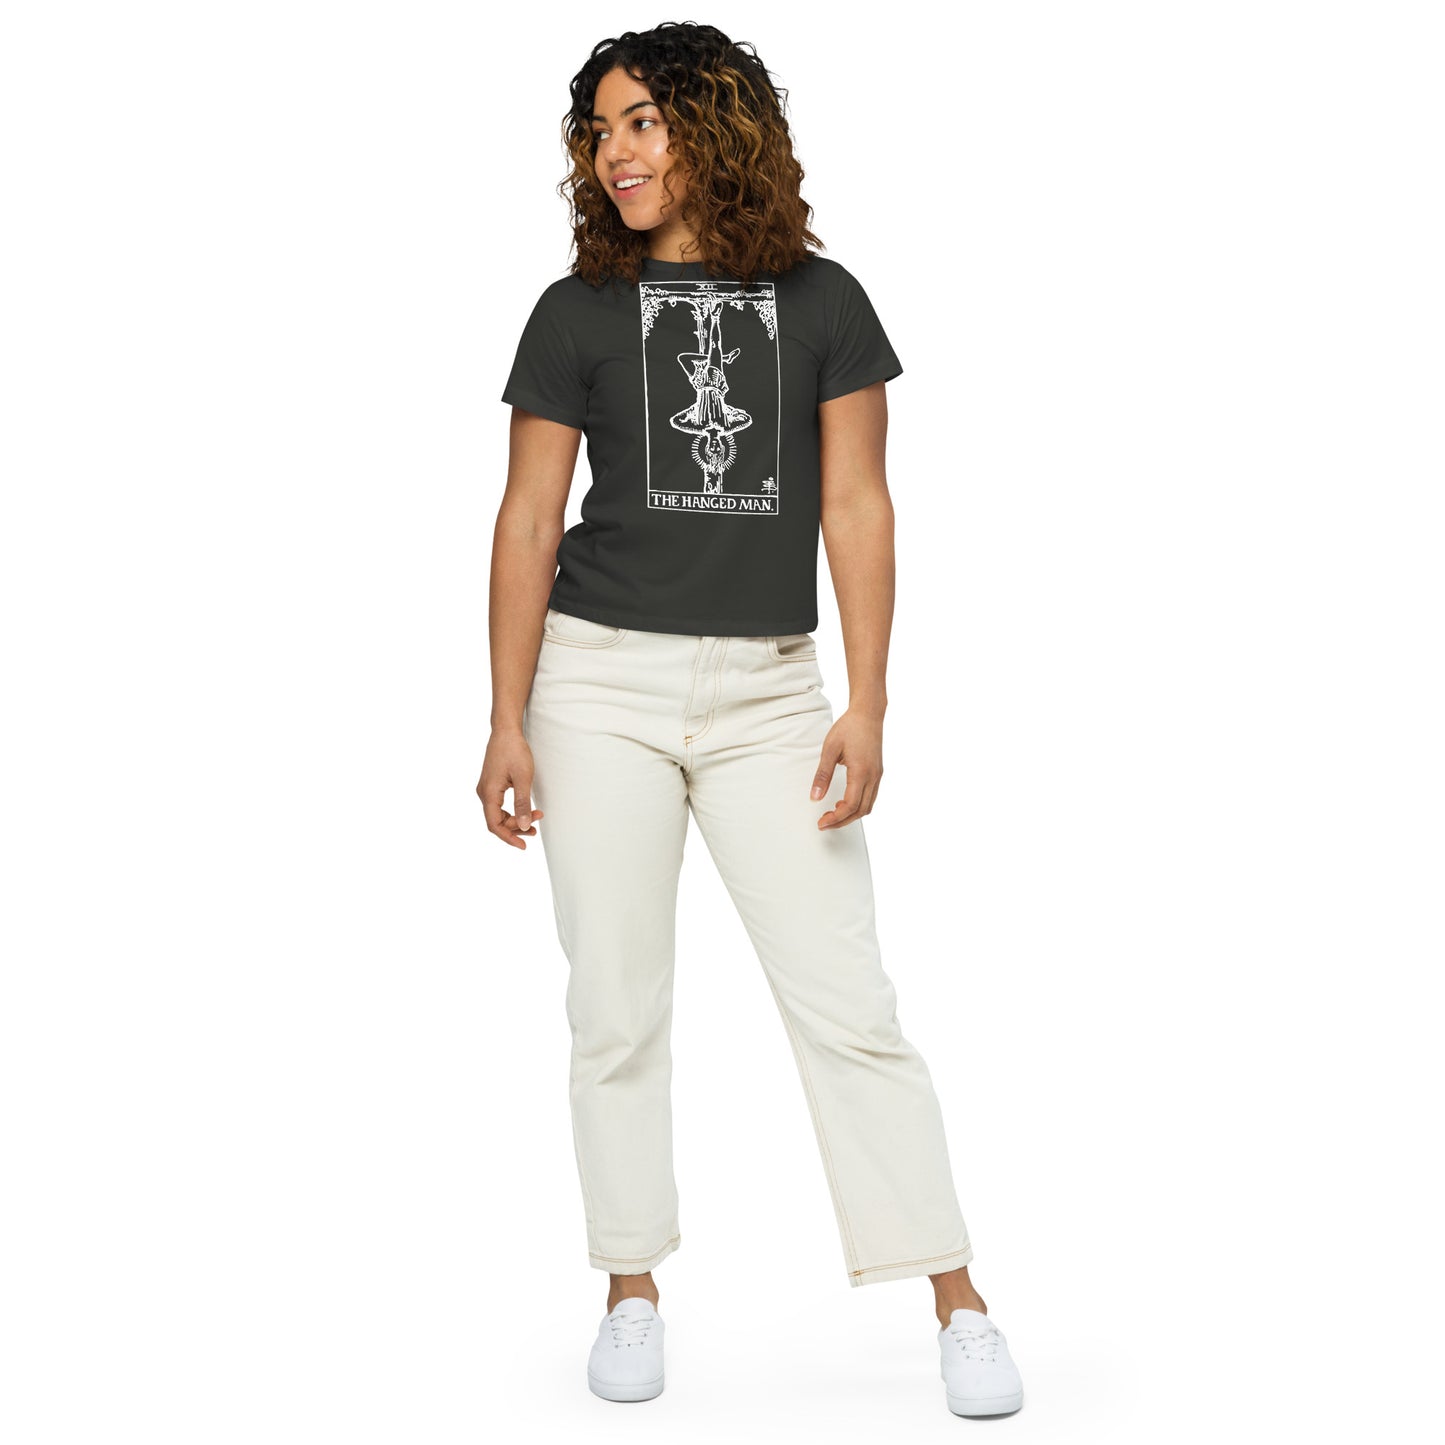 The Hanged Man High-Waisted Tee for Women